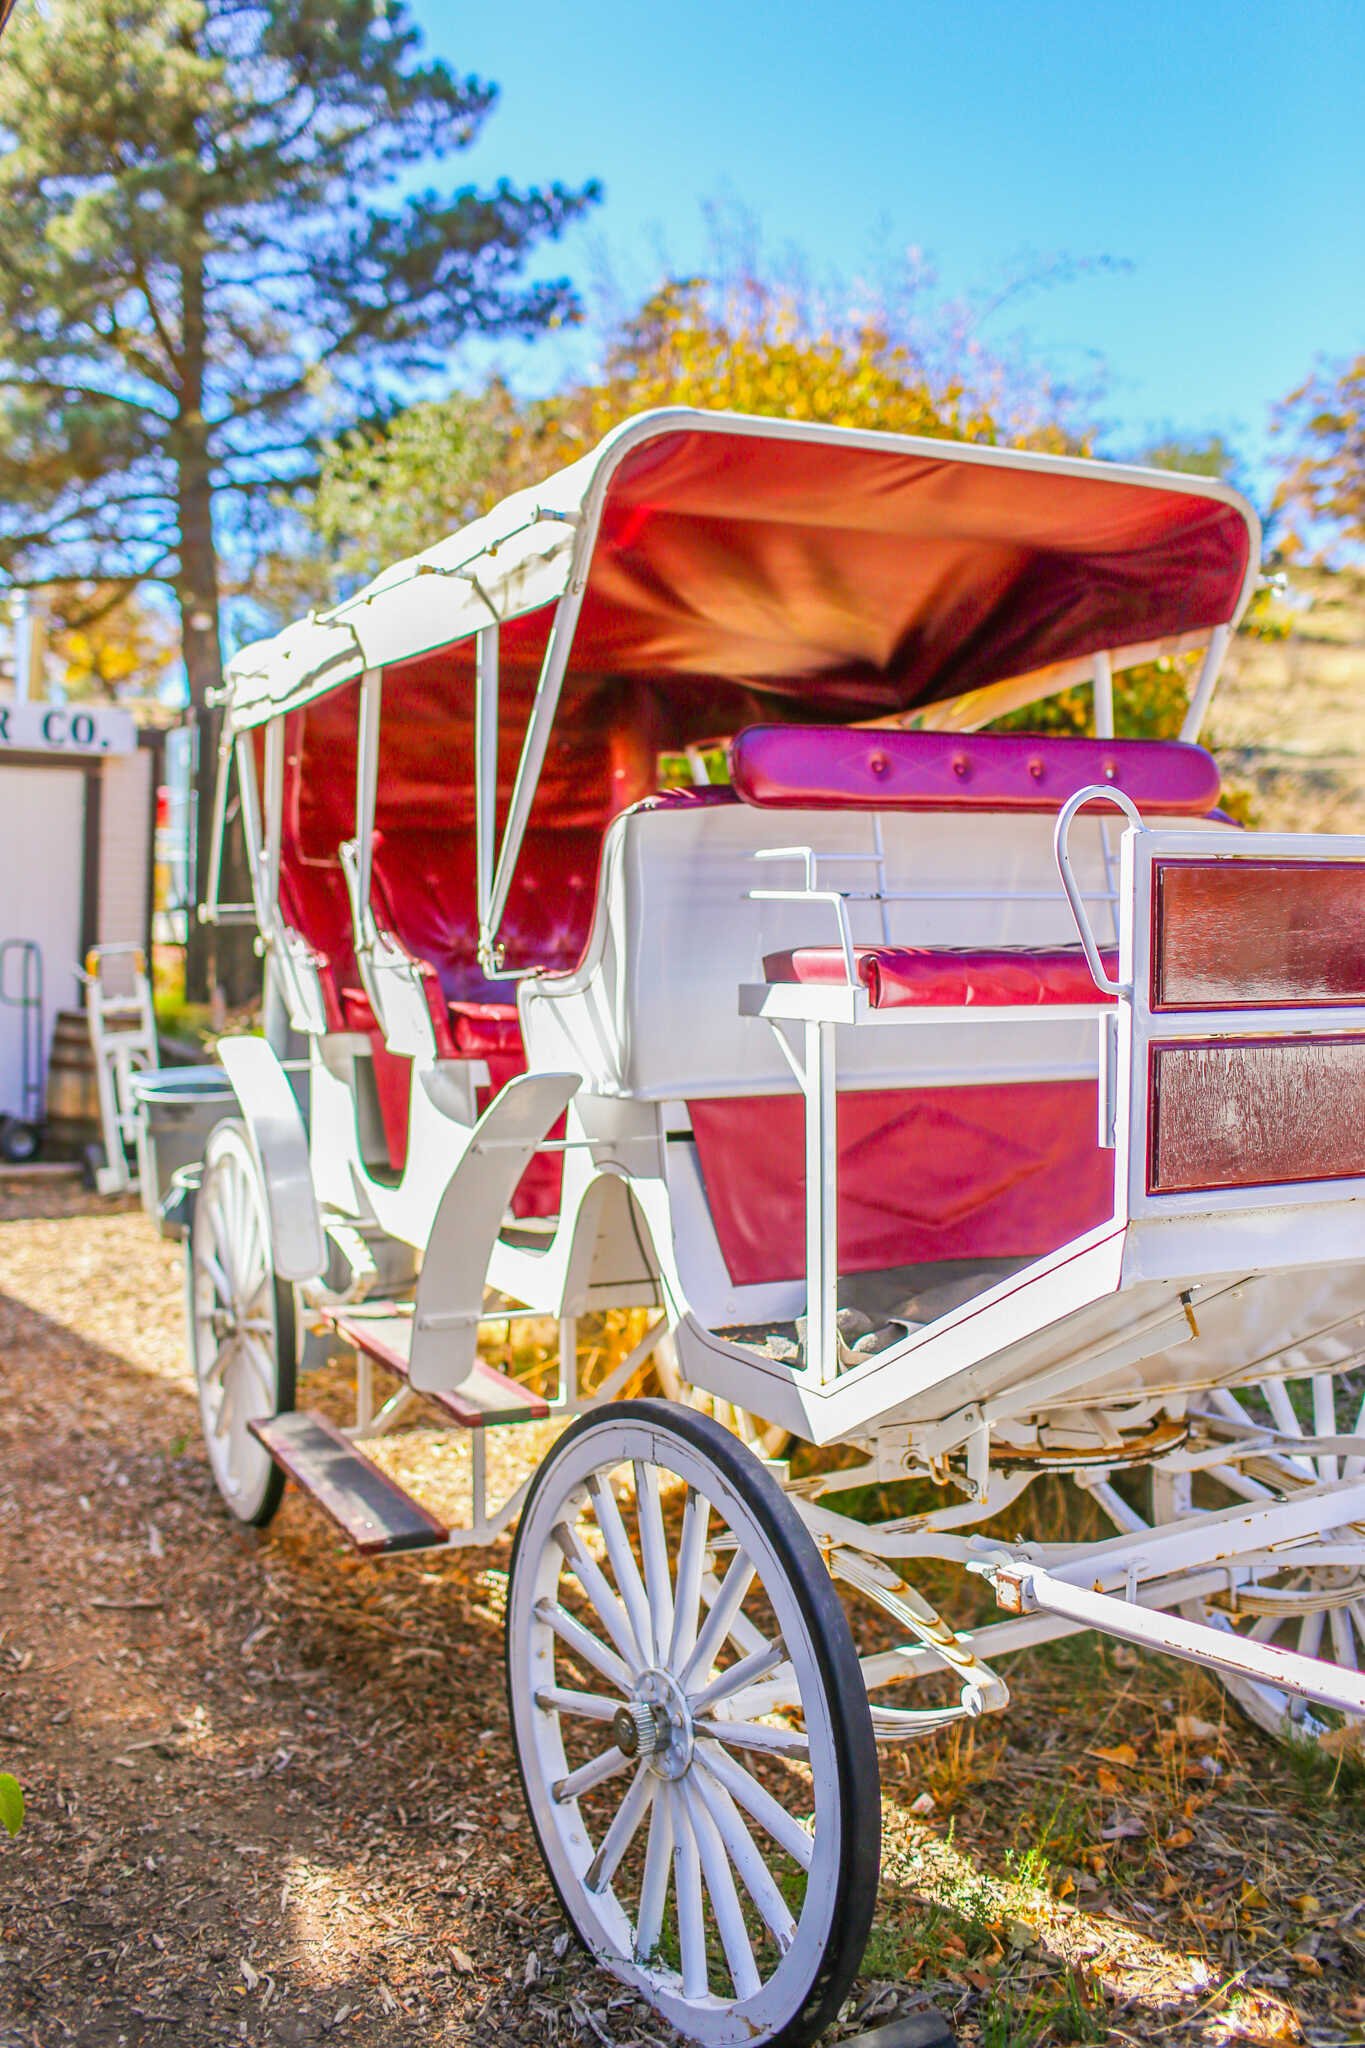 The Complete Travel Guide to Julian, California - Julian Beer Company vintage stage coach.